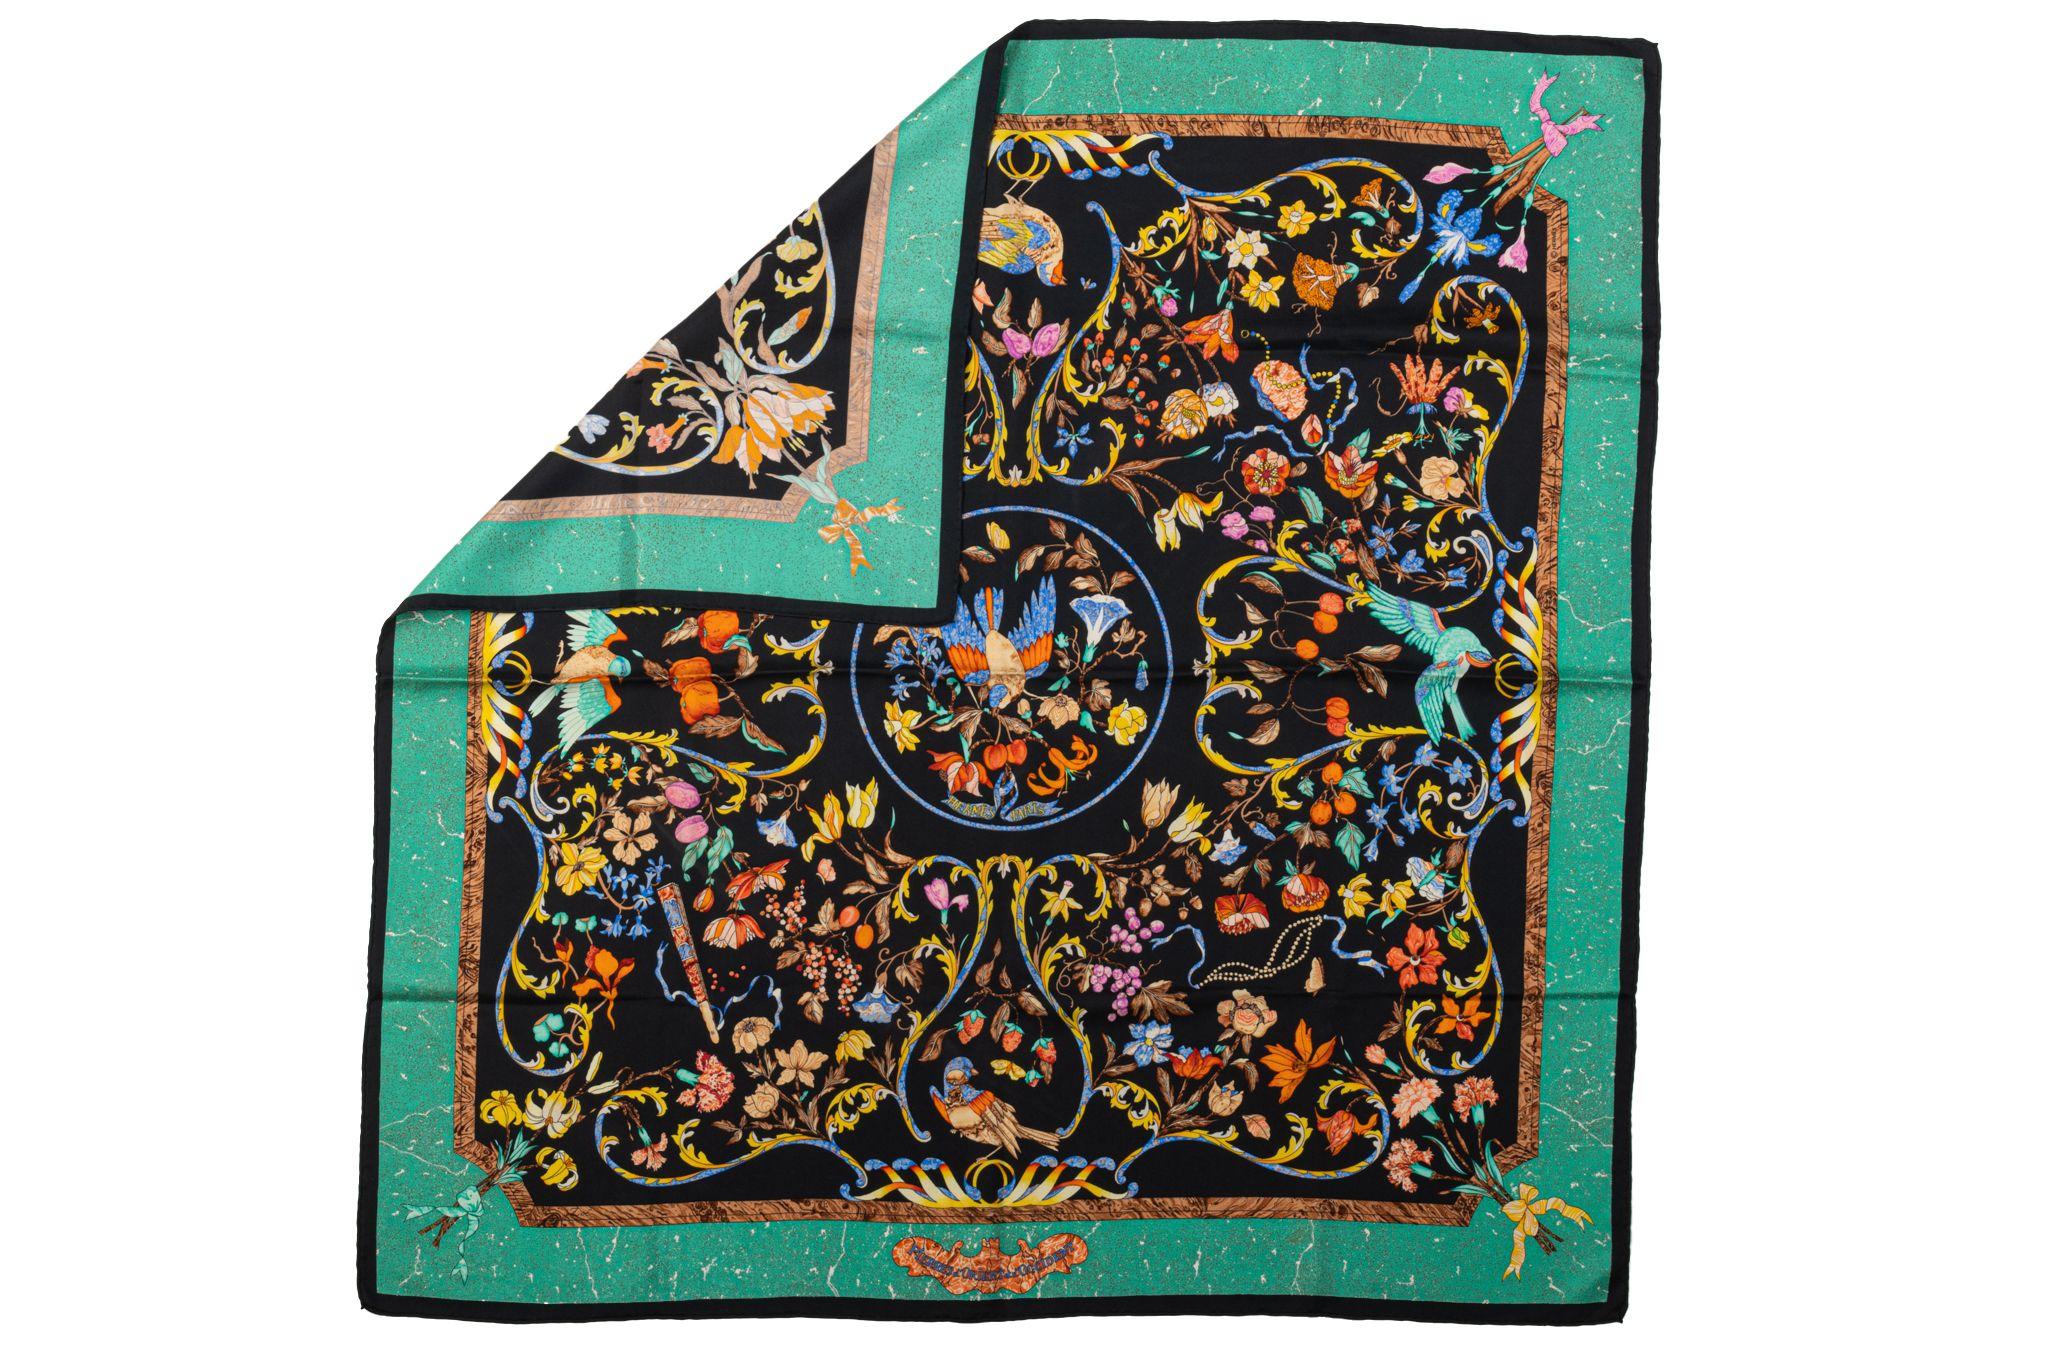 Hermès Pierres d’Orient et d’Occident silk scarf, green and black. Hand rolled edges. No care tag.